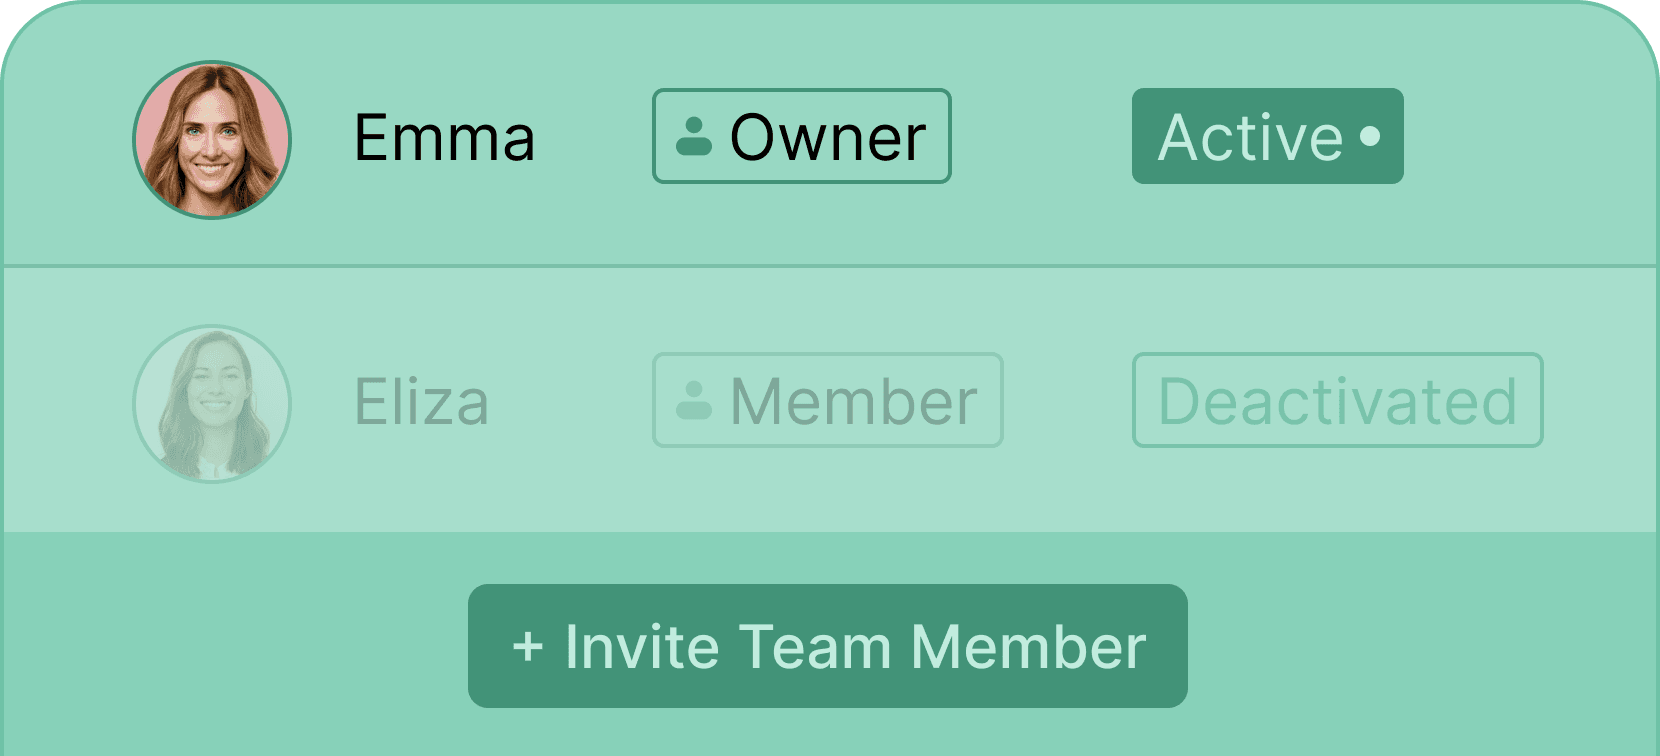 Manage team access - Certifier features